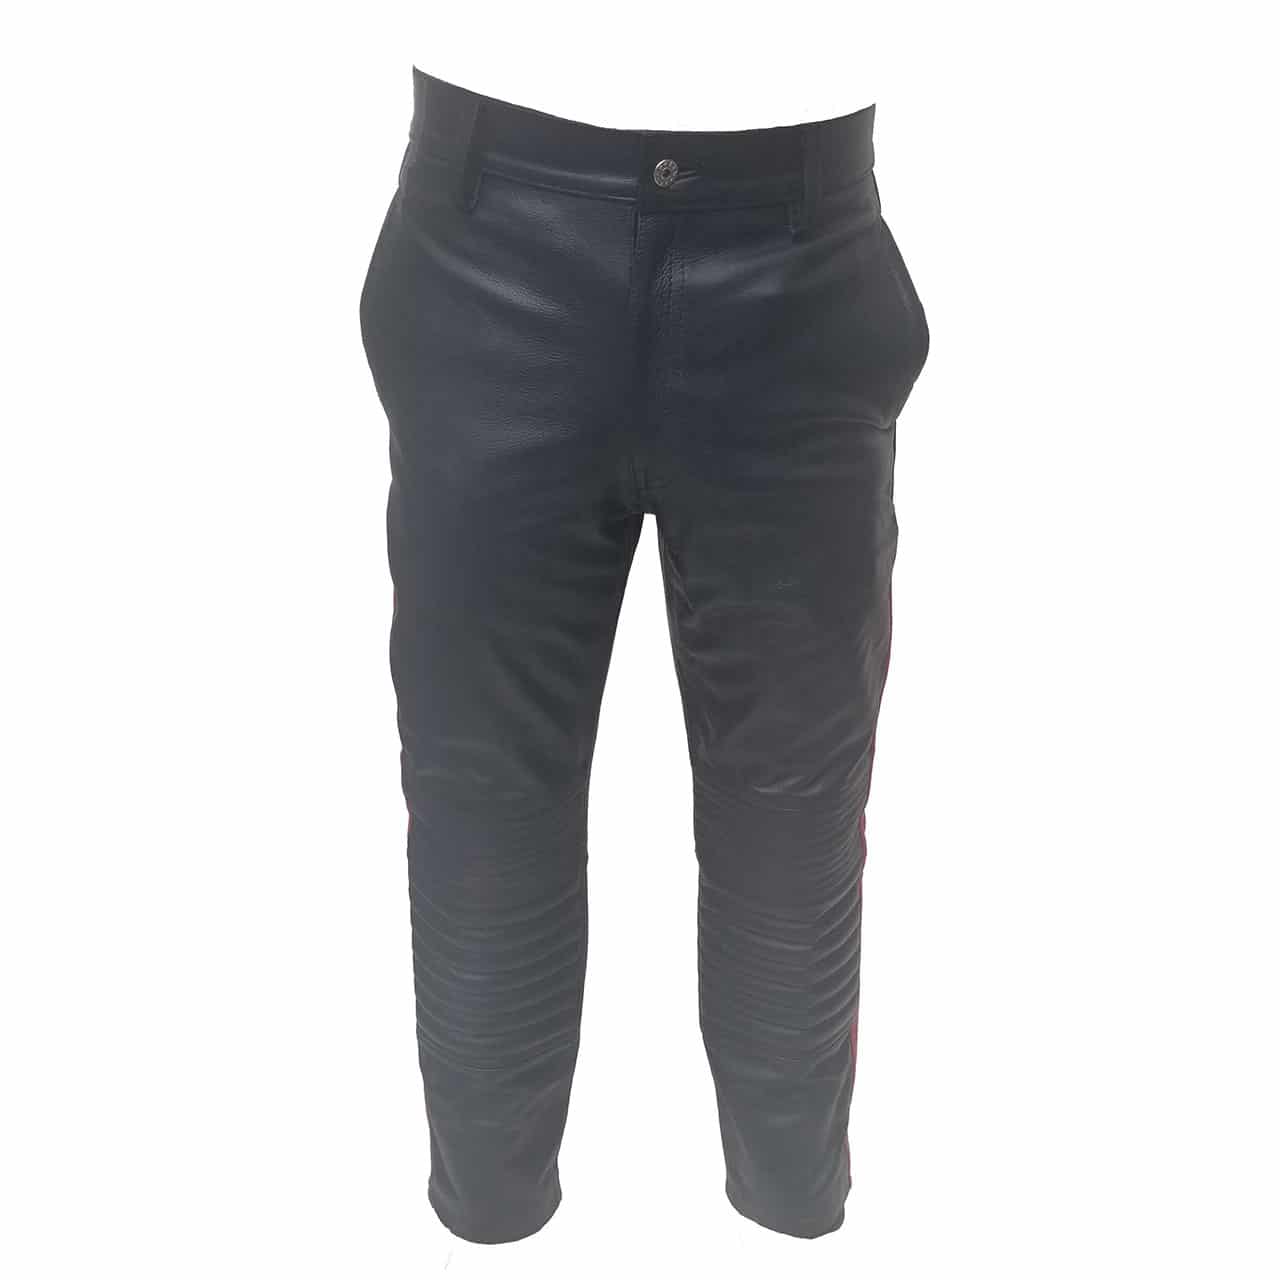 MENS BLACK LEATHER MOTORCYCLE BIKERS PANTS JEANS TROUSERS - JEANS4